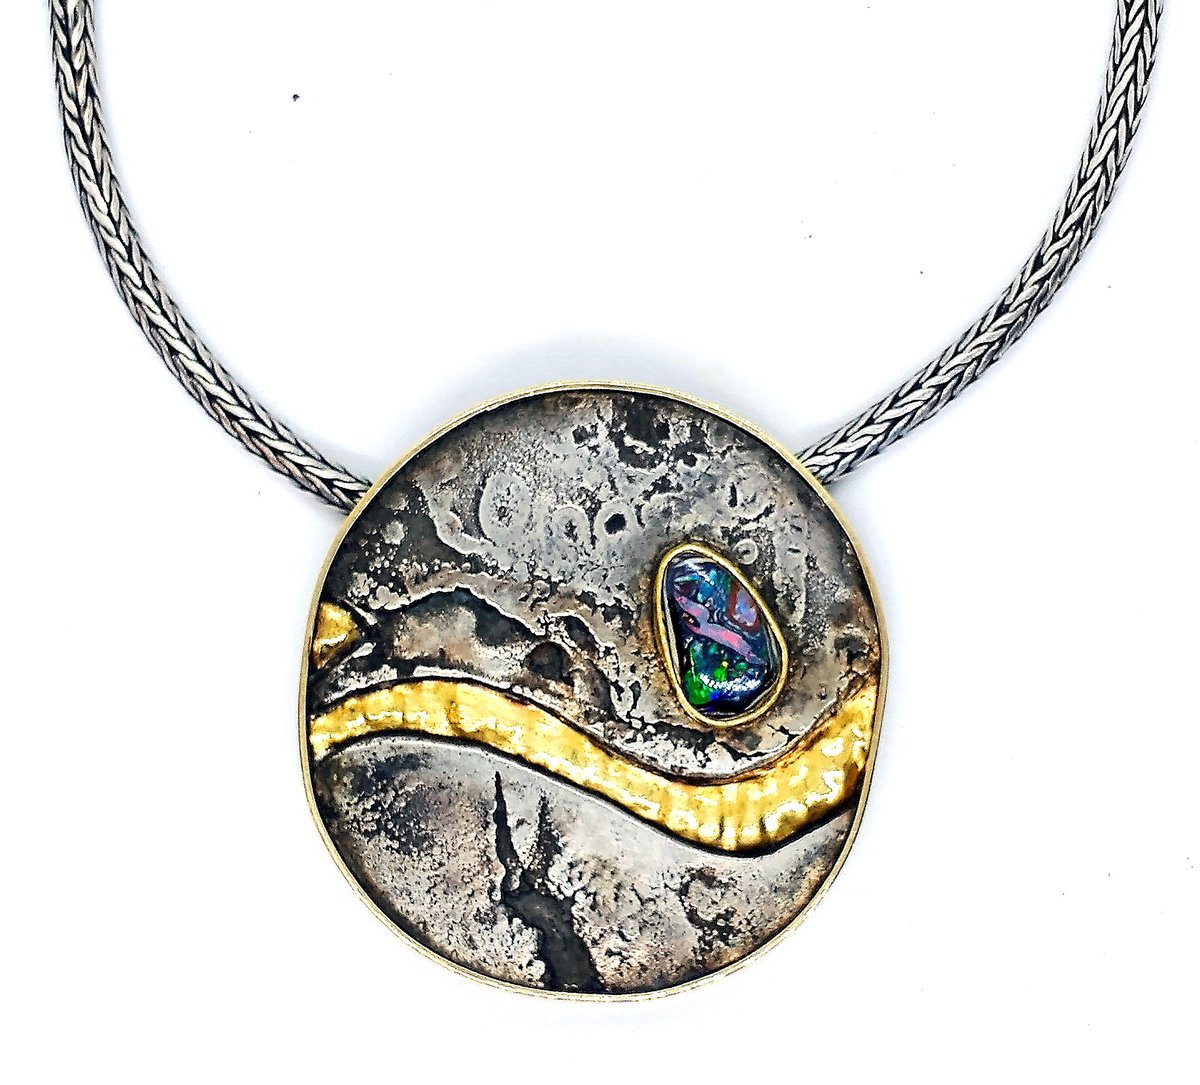 Image of Gold and Silver Fused Pendant with Opal